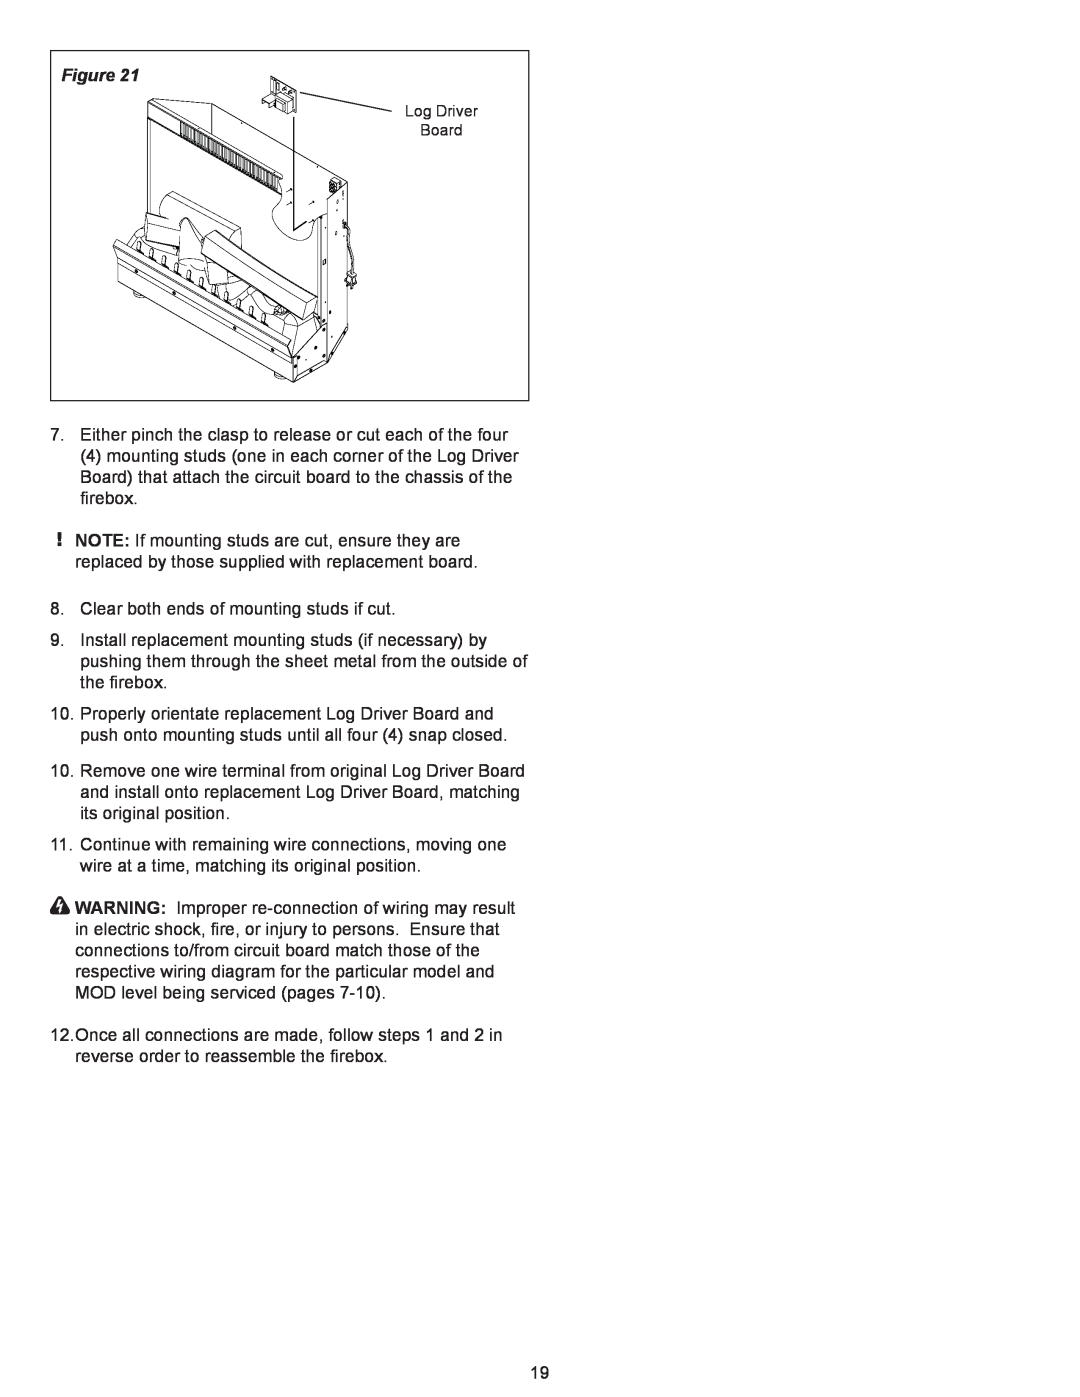 Dimplex Dimplex DFI2309 service manual Clear both ends of mounting studs if cut 